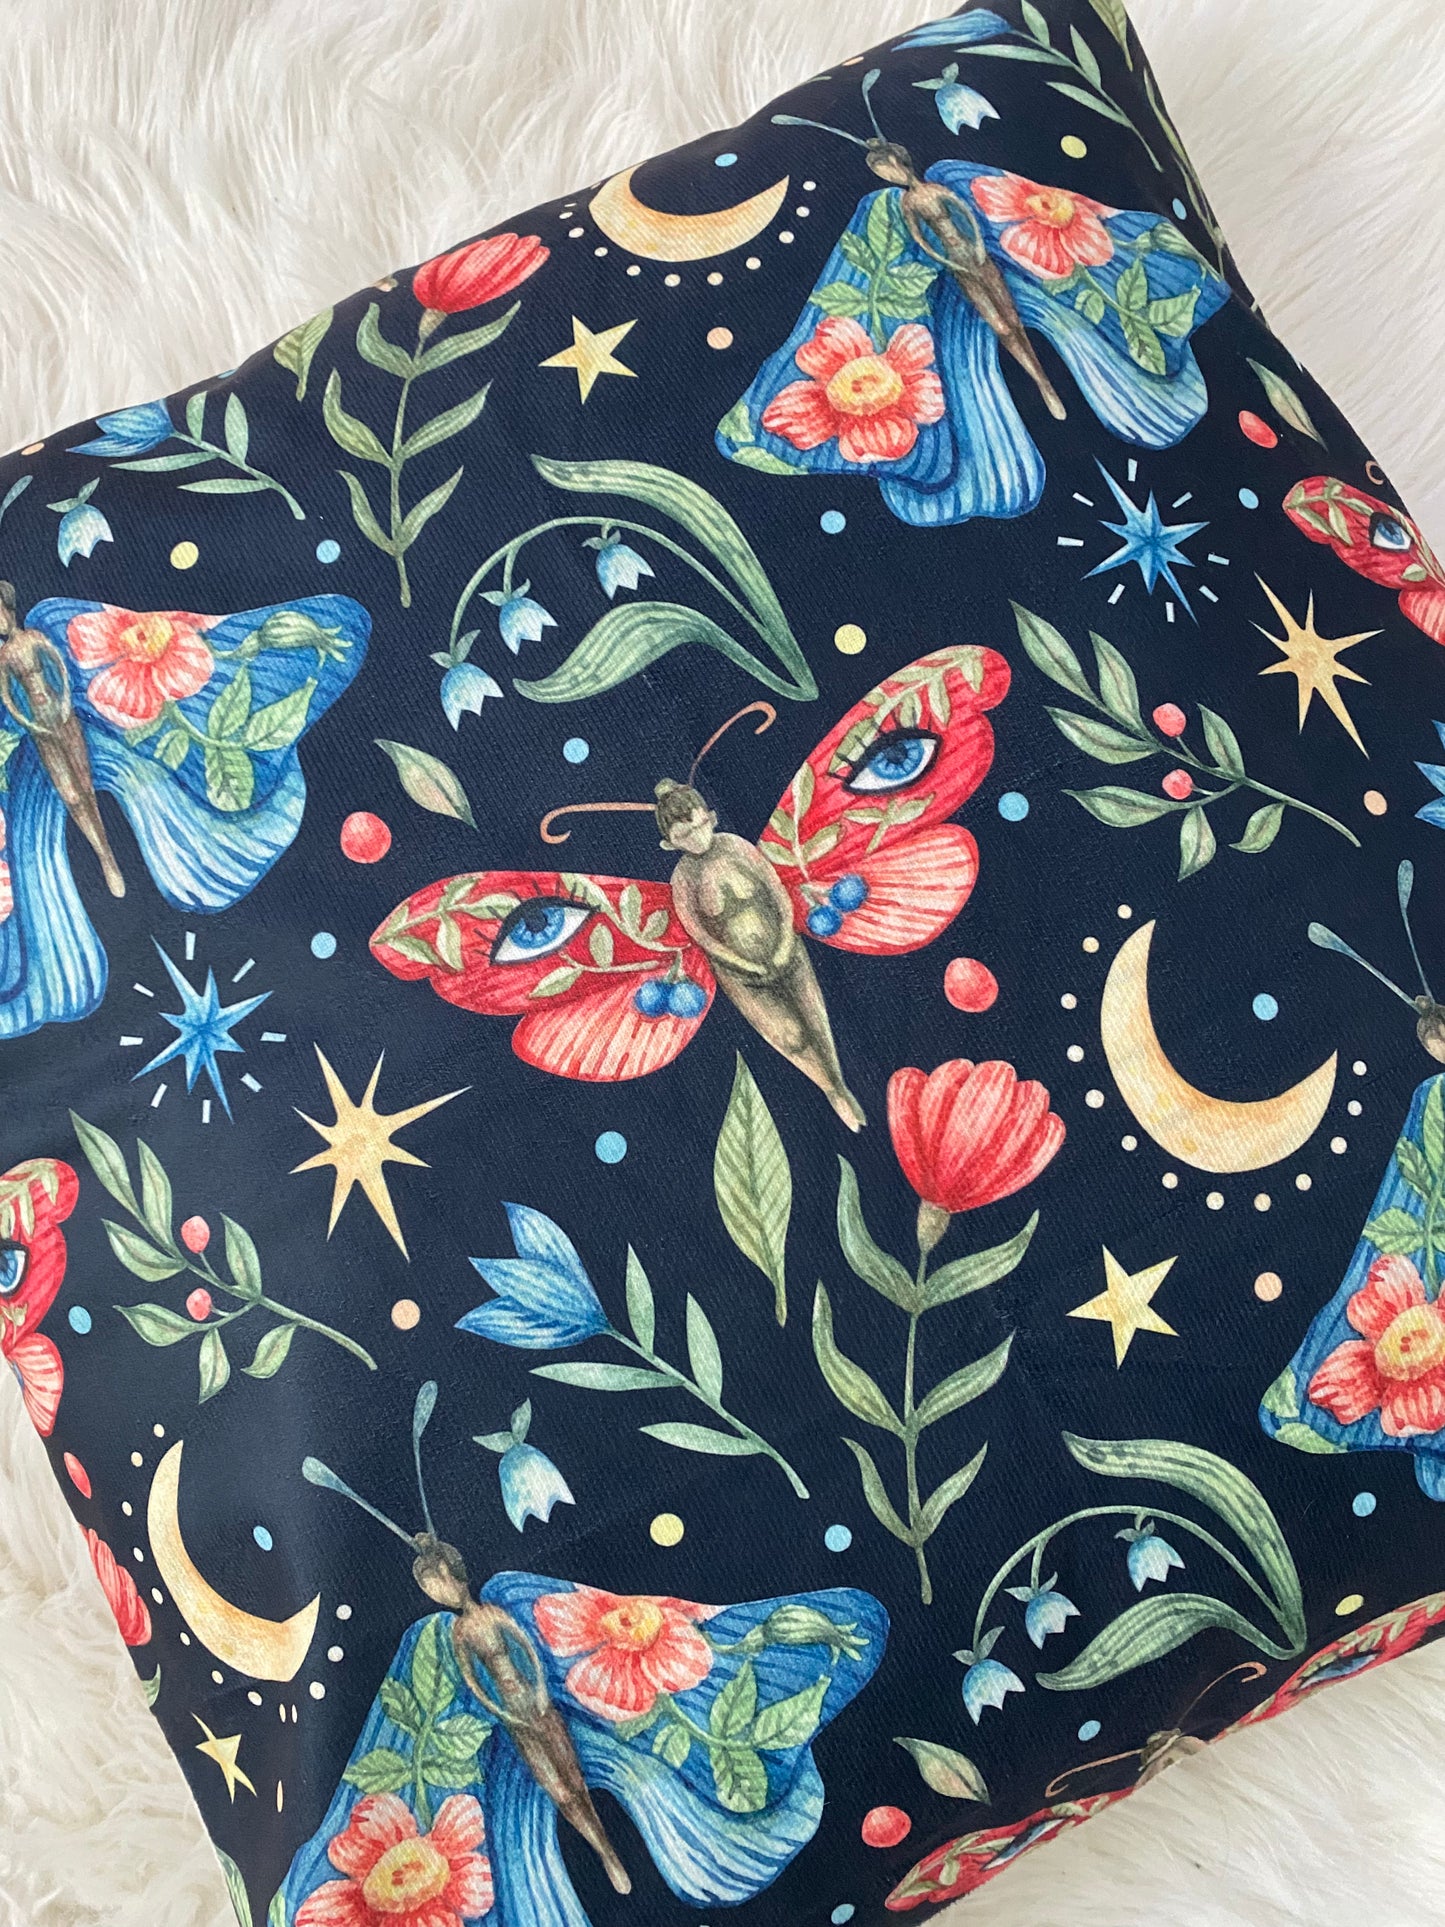 Whimsical pillow covering